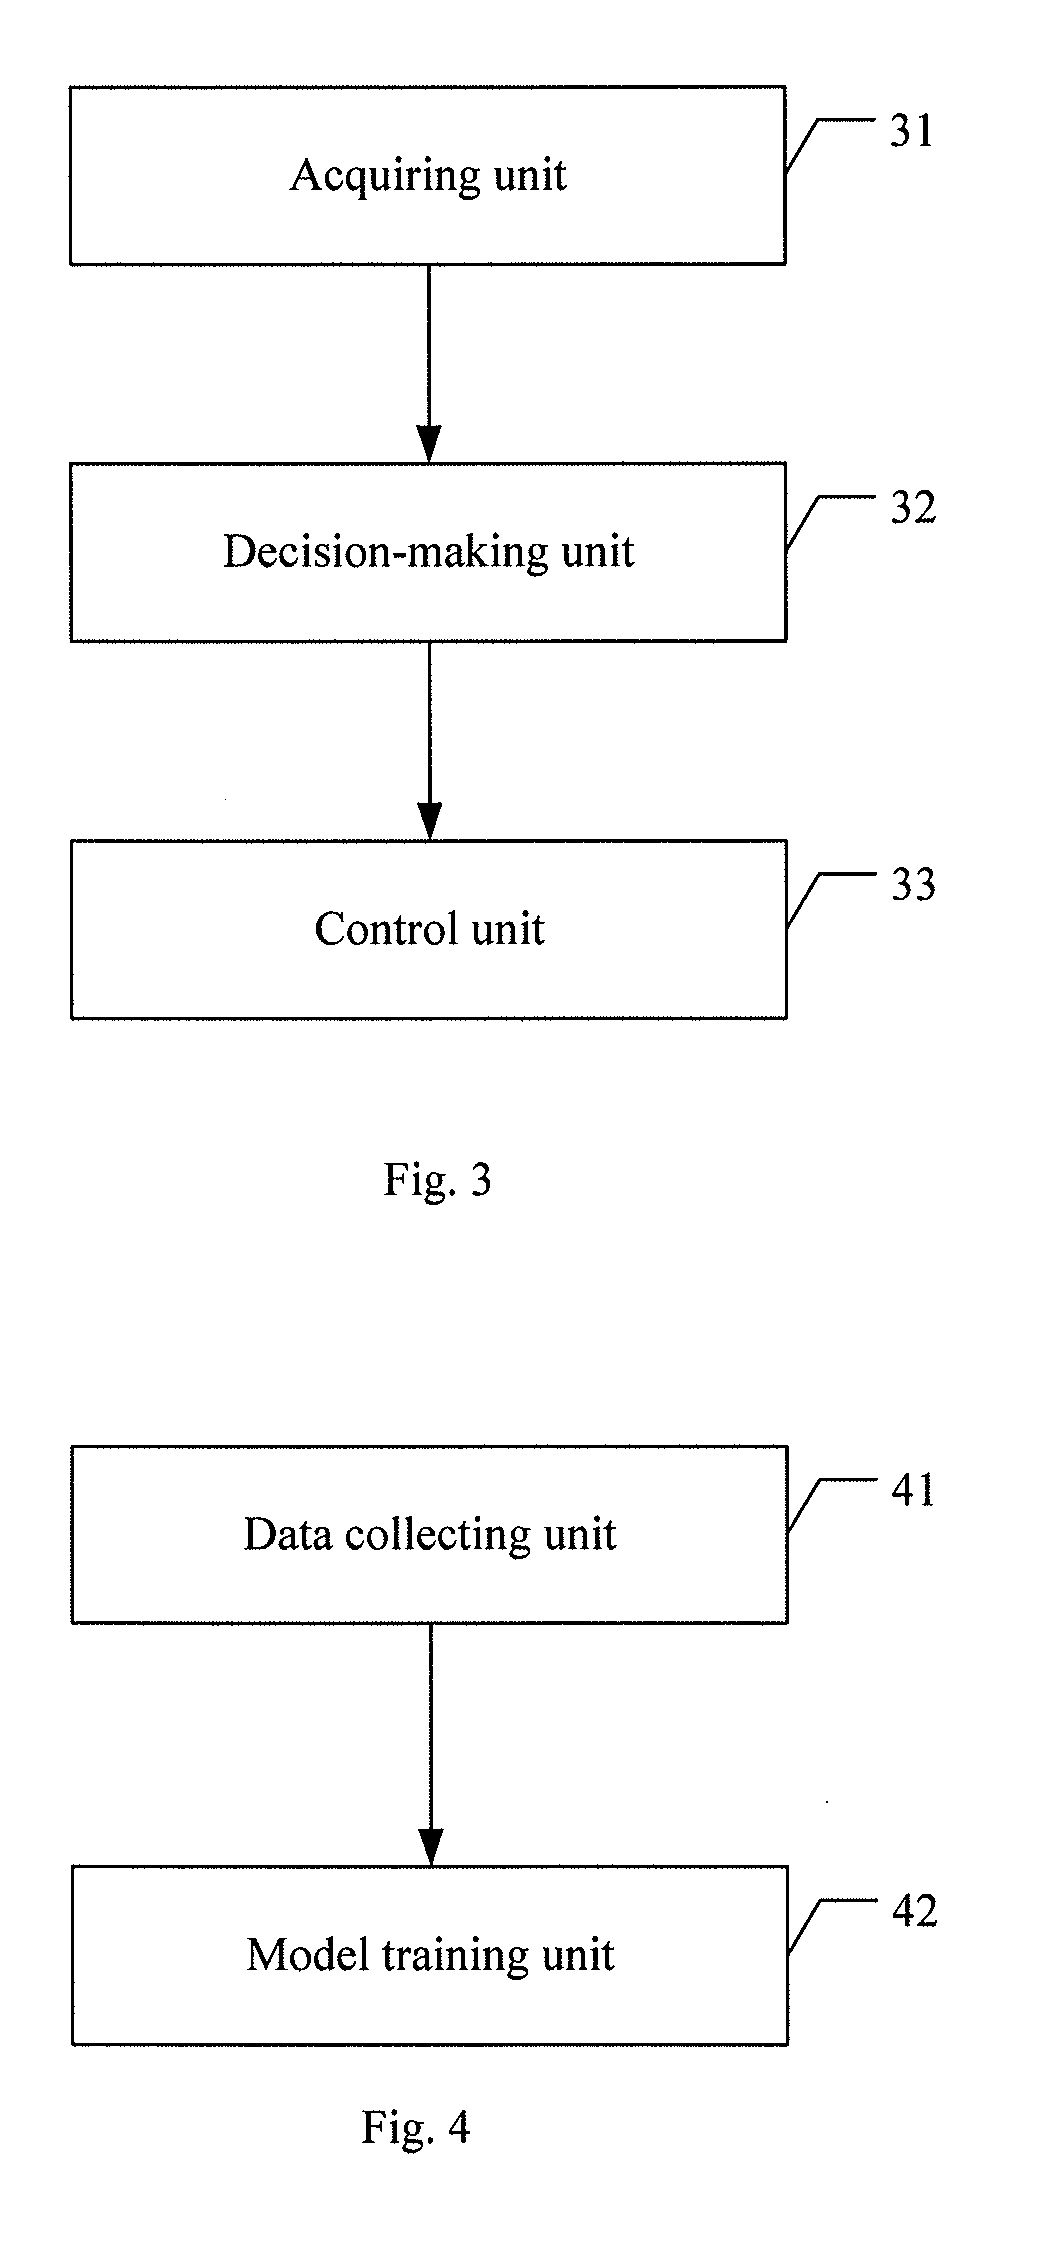 Vehicle control method and apparatus and method and apparatus for acquiring decision-making model